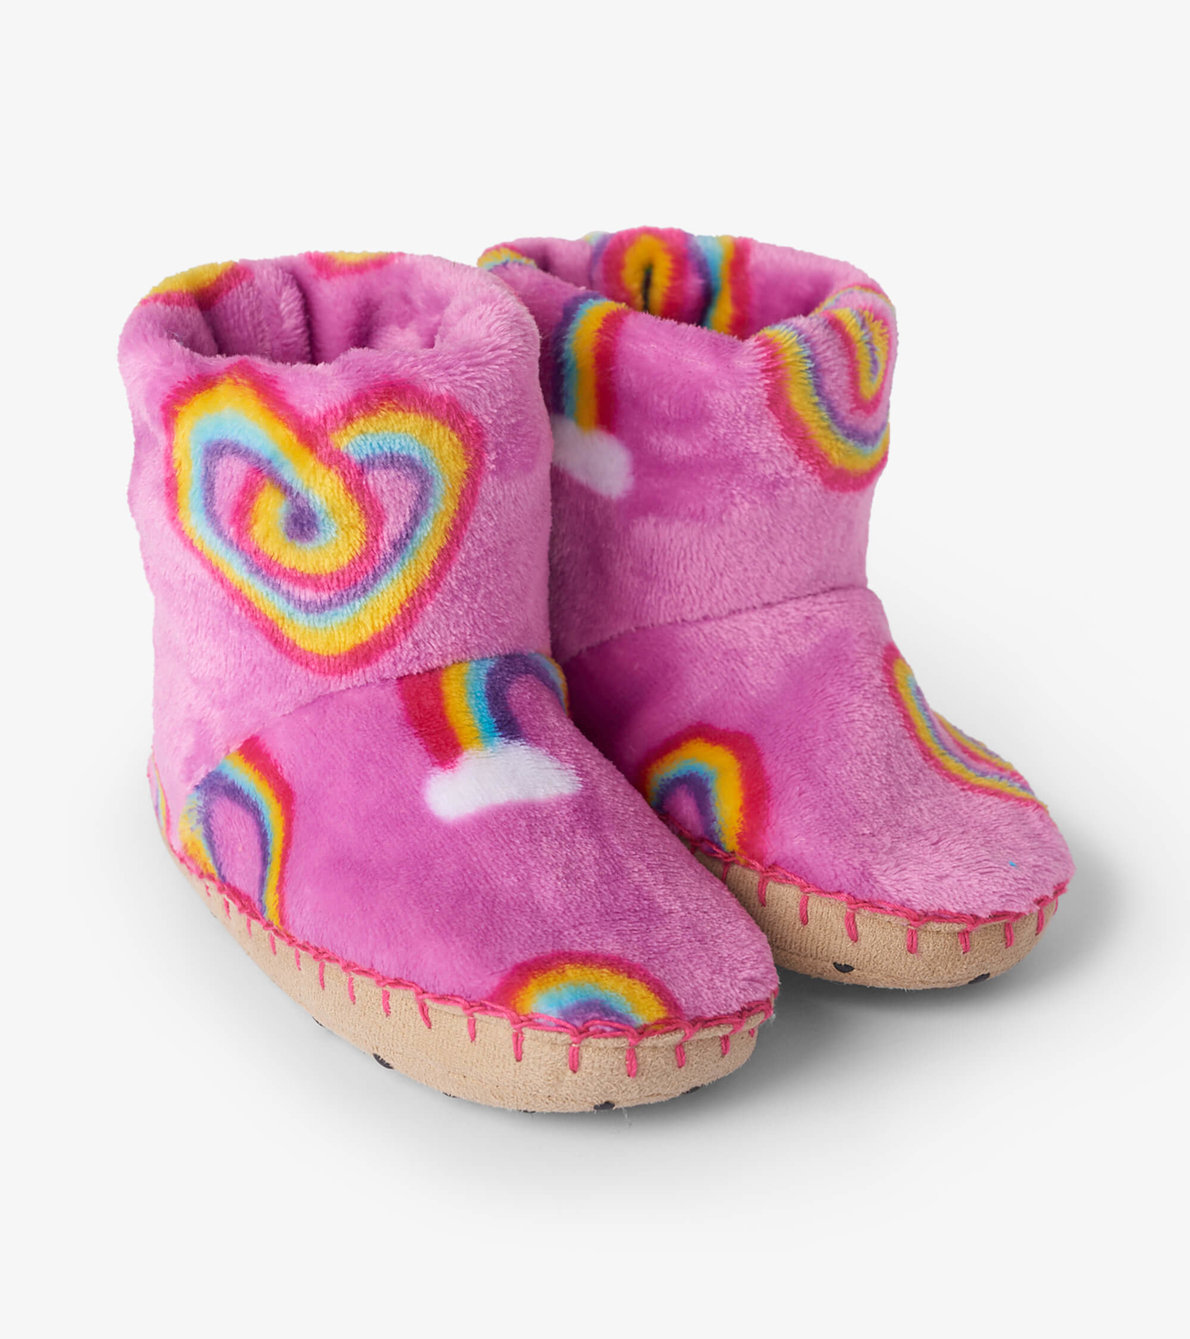 View larger image of Twisty Rainbow Hearts Fleece Slippers